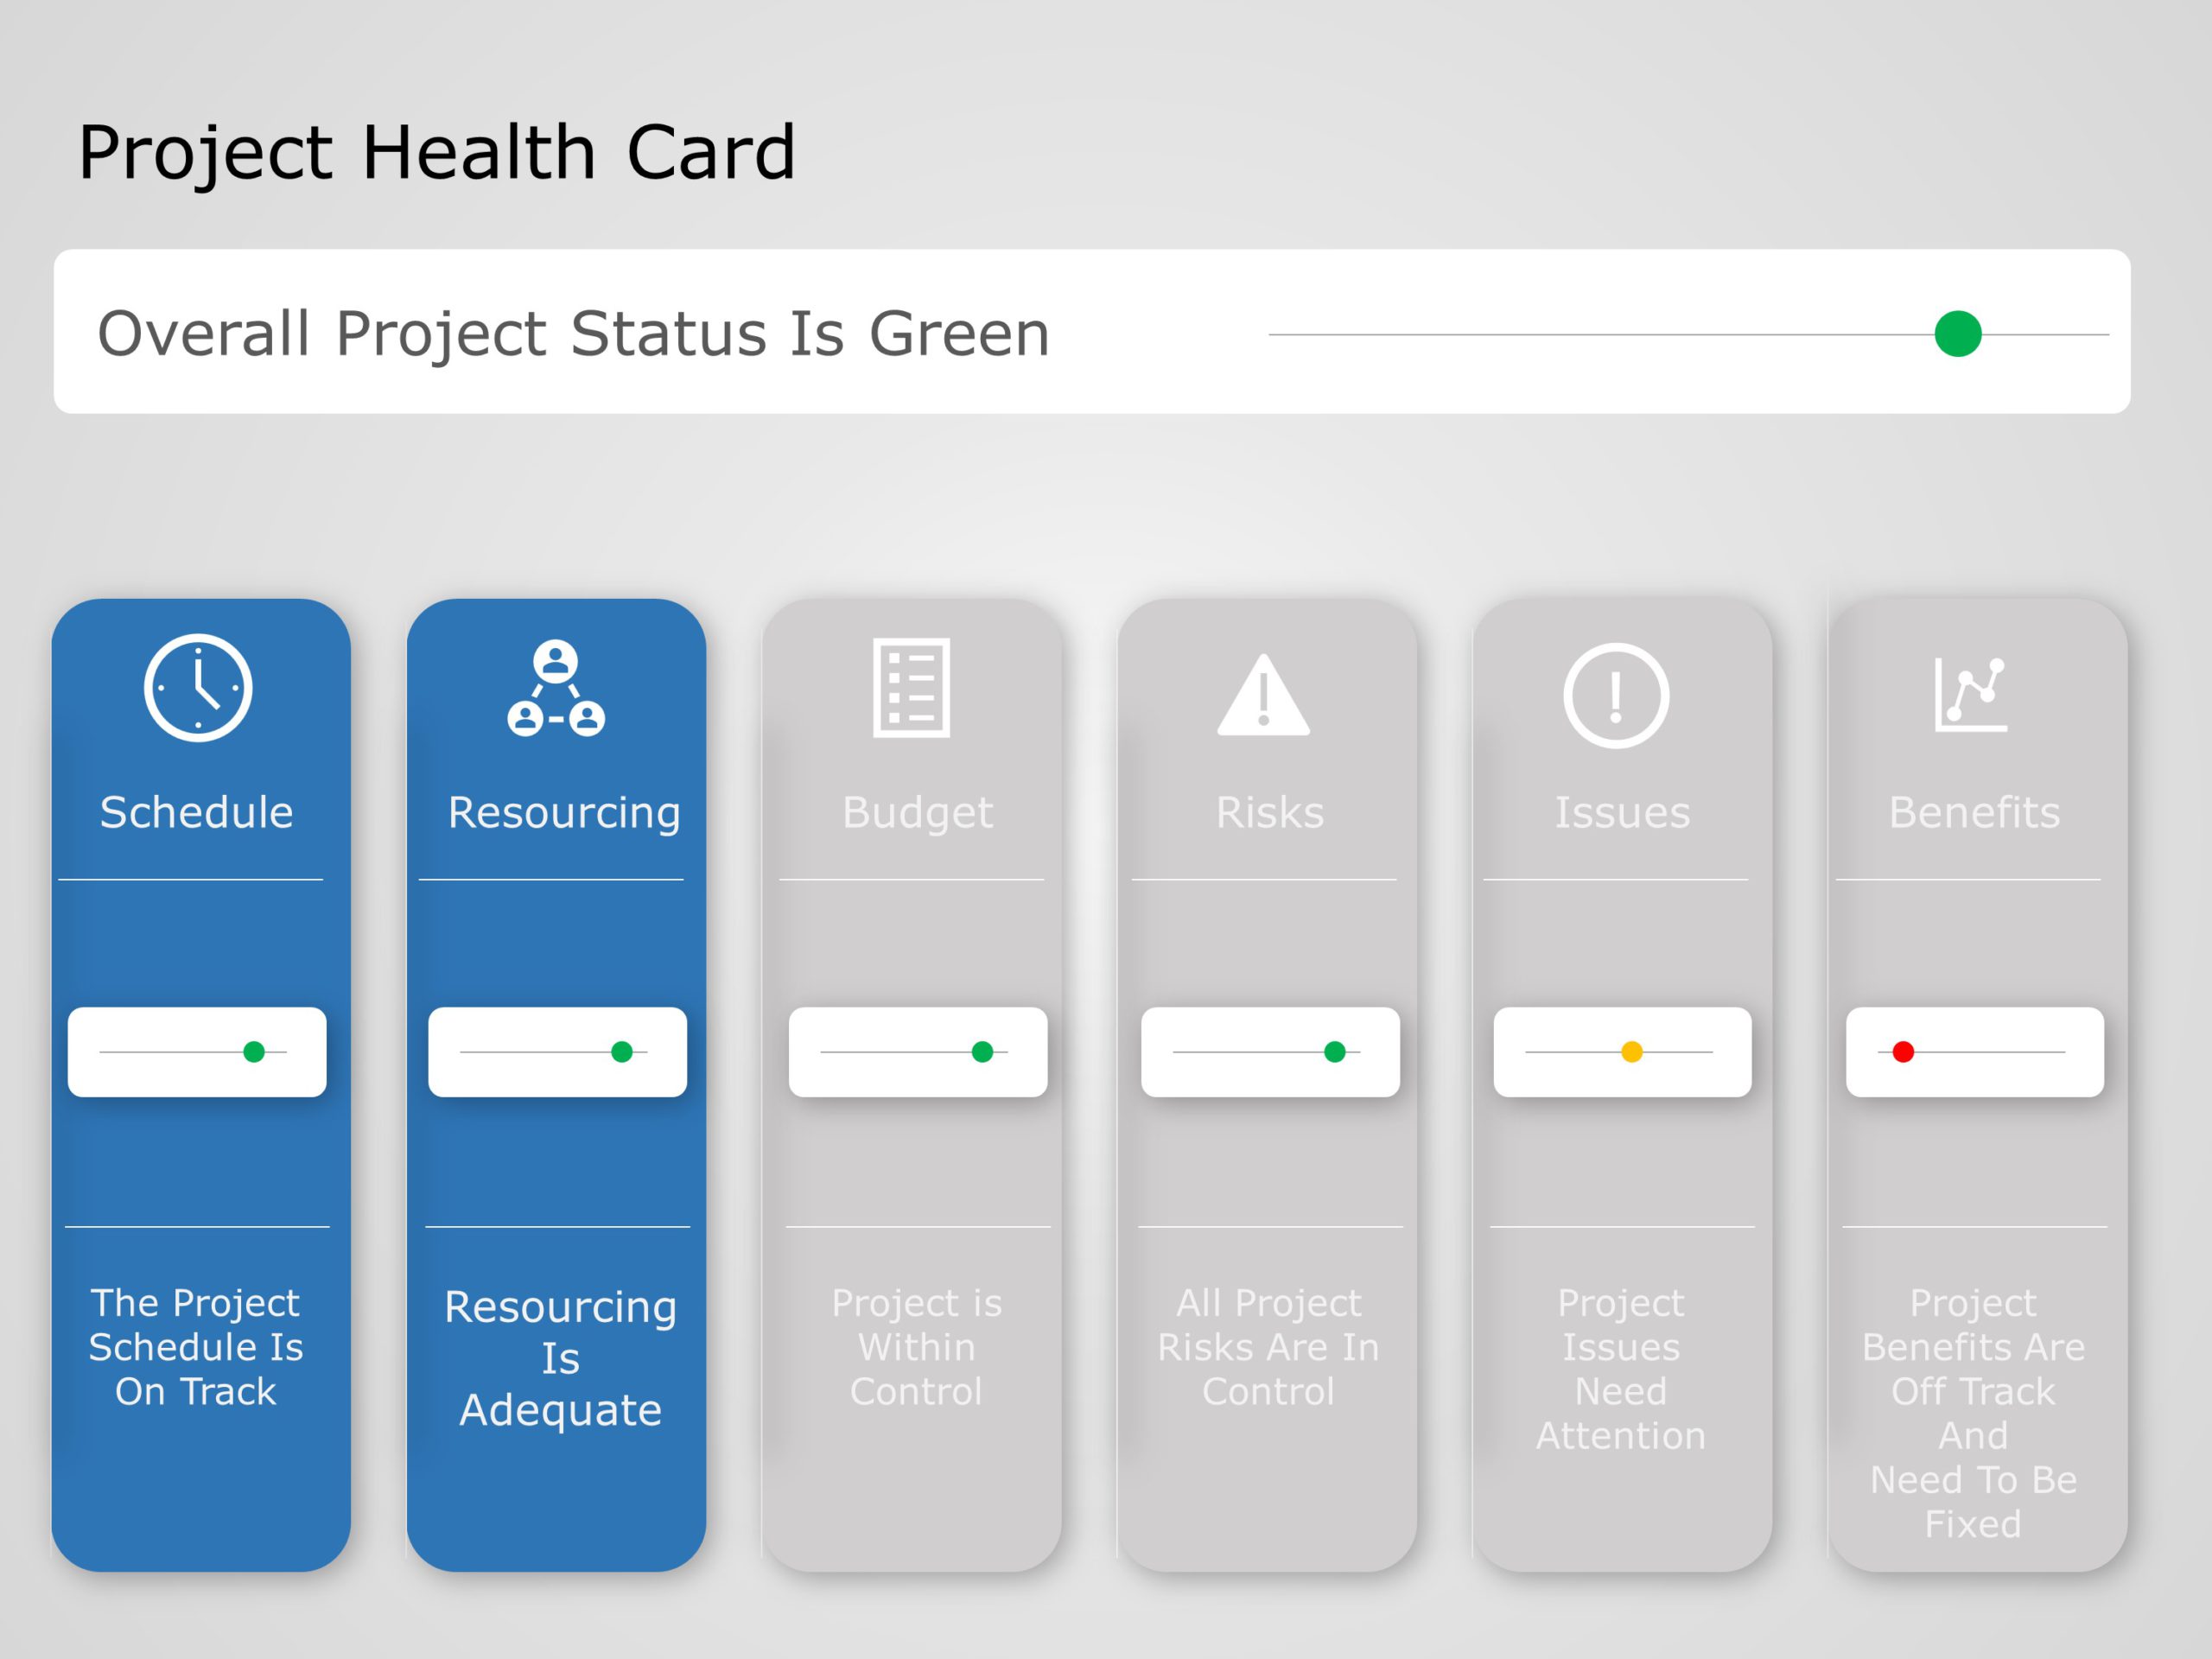 Project Health Card PowerPoint Template